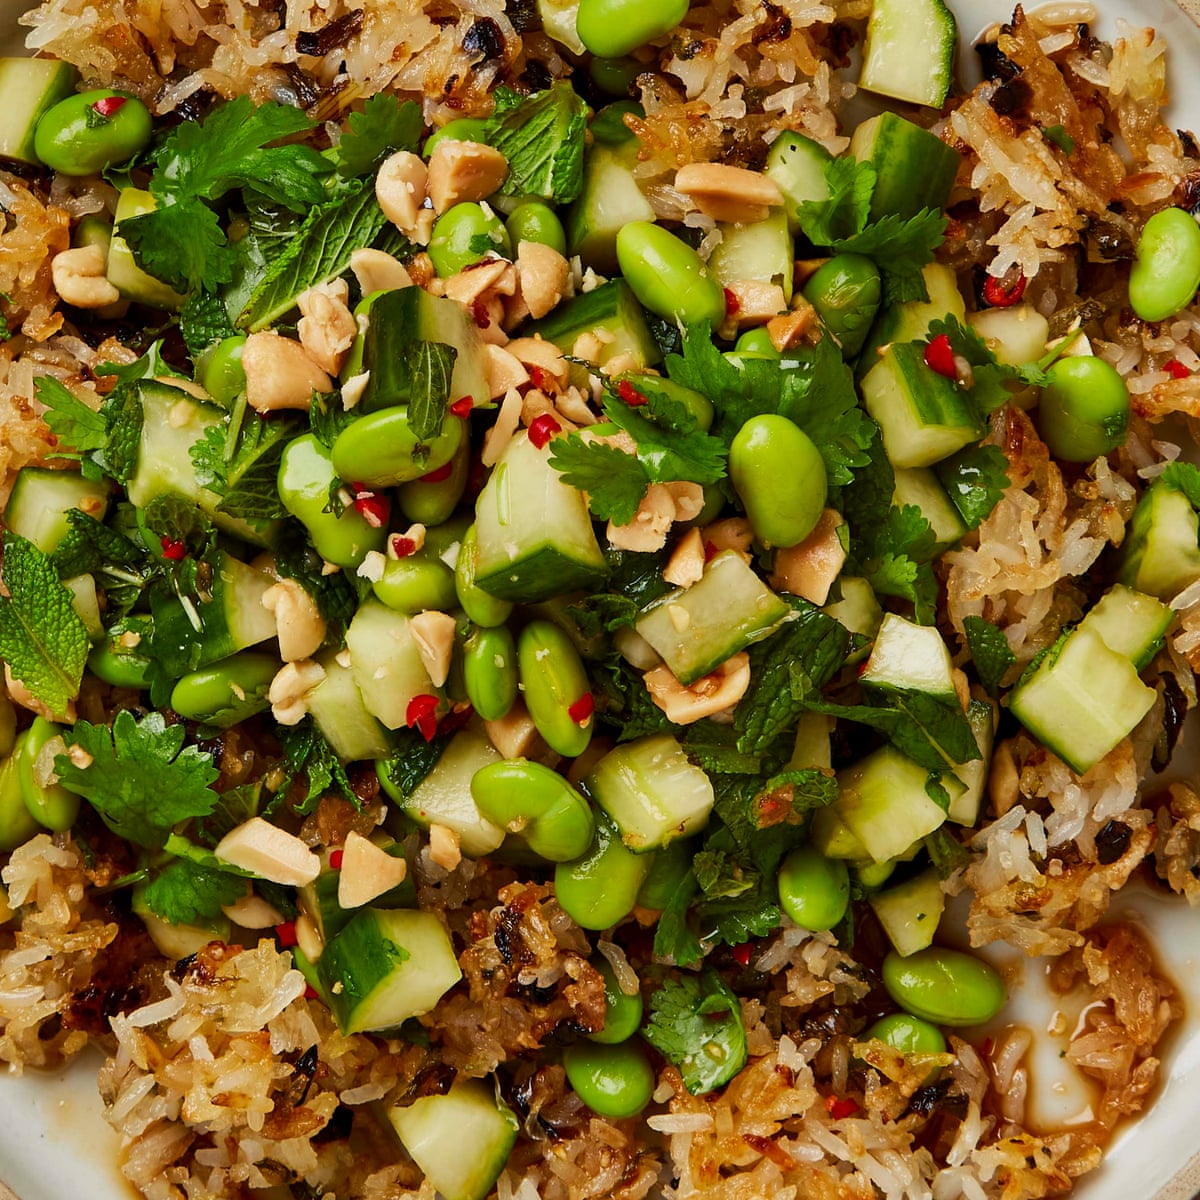 Meera Sodha S Vegan Recipe For Crispy Fried Rice With Cucumber Peanut And Herb Salad Food The Guardian